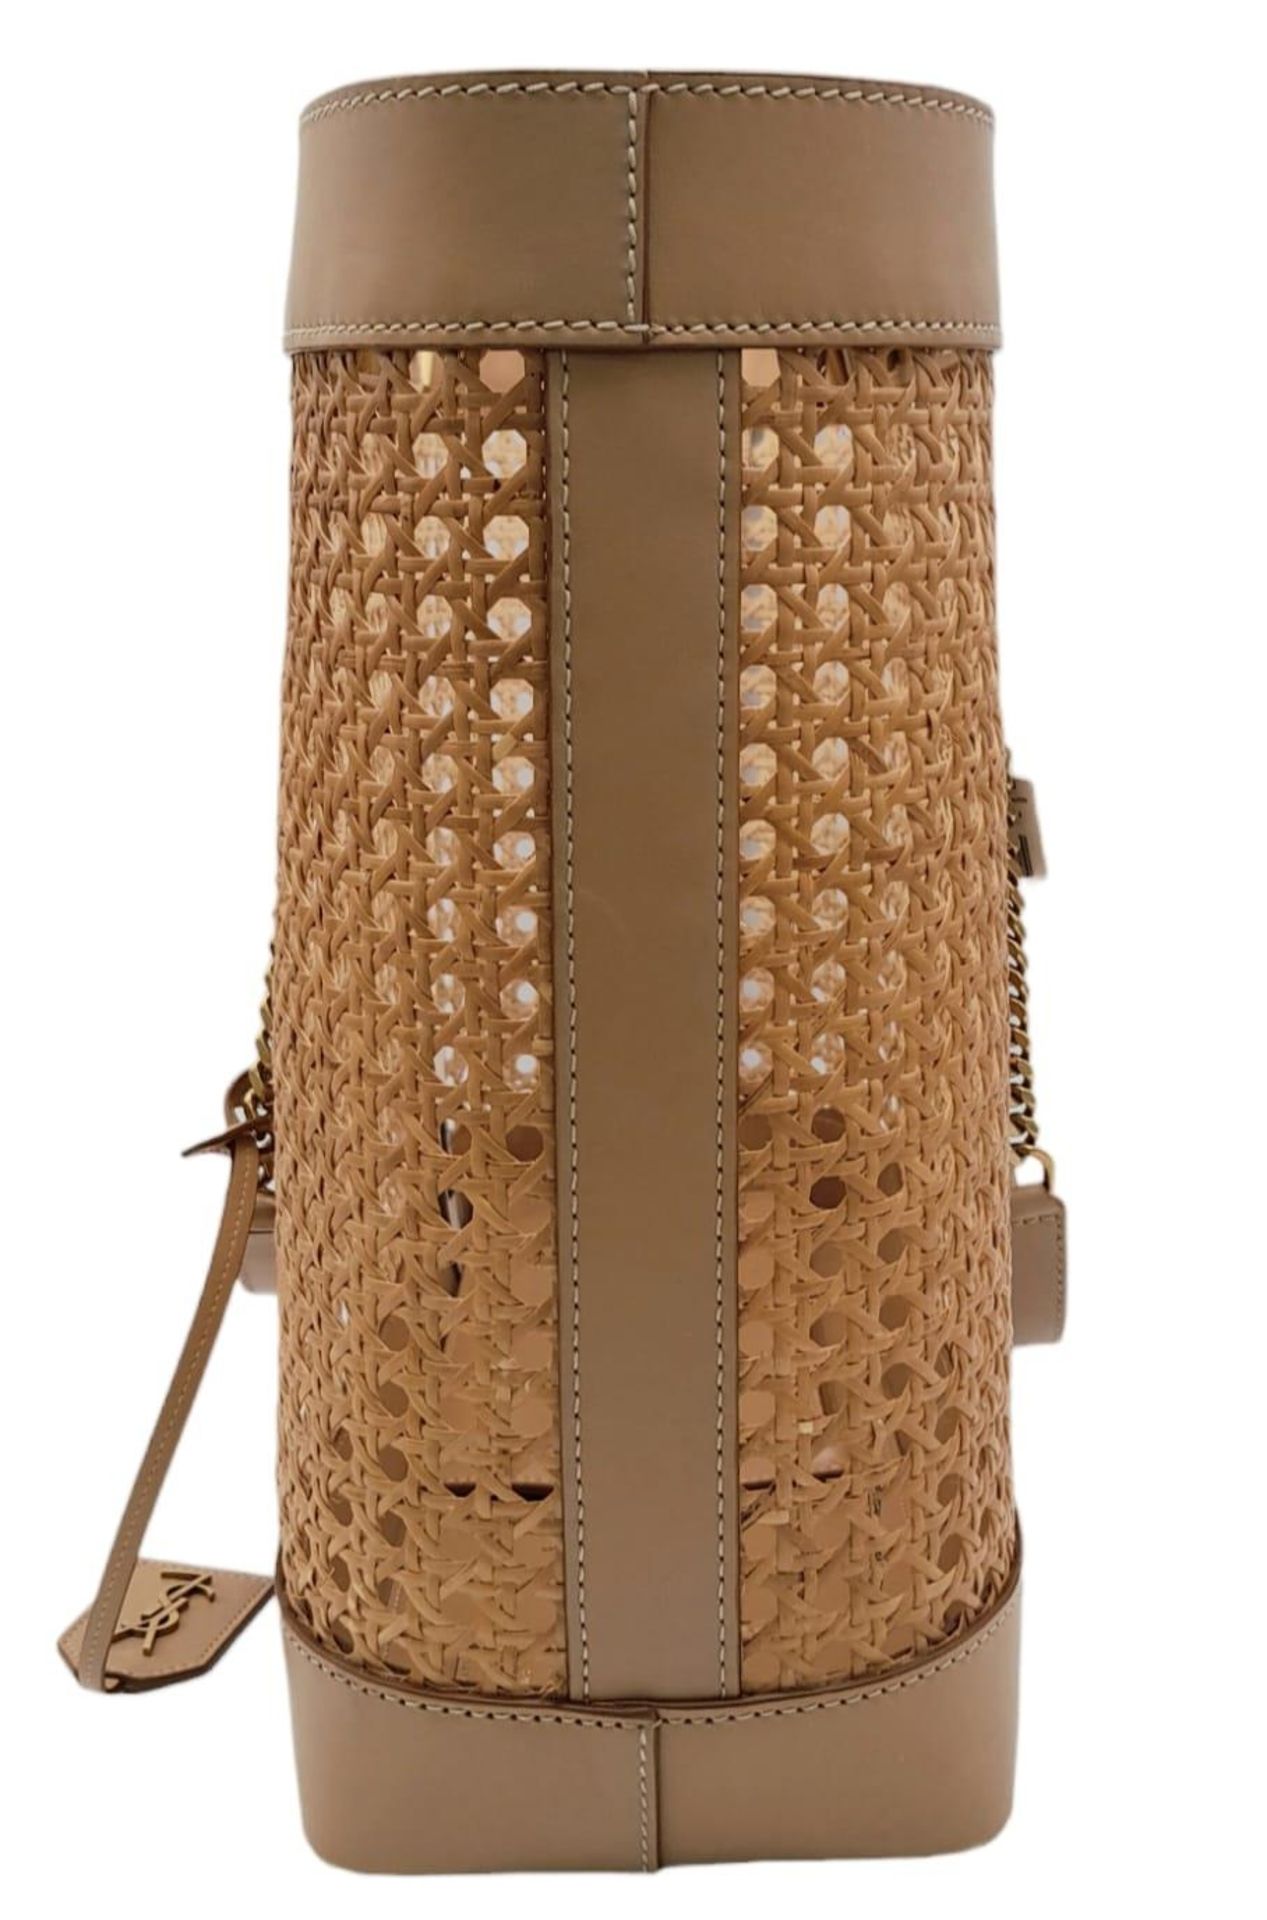 A Saint Laurent Beige Tote Bag. Woven rattan and leather trim exterior. Magnetic closure, gold-toned - Image 4 of 12